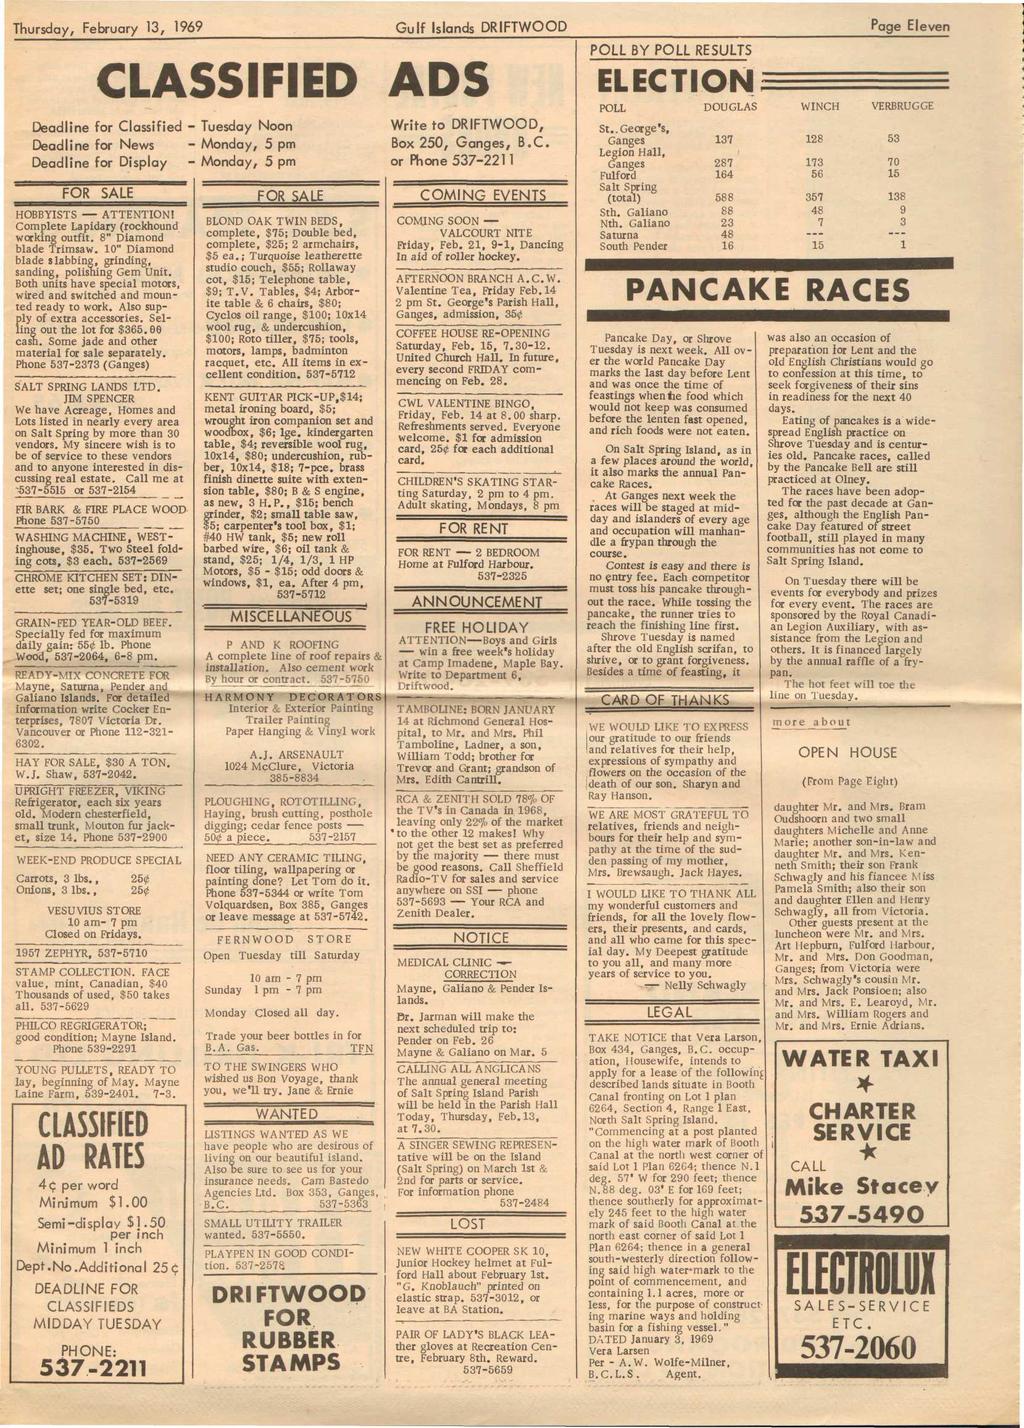 Thursday, February 13, 1969 Gulf Islands DRIFTWOOD Page Eleven CLASSIFIED ADS Deadline for Classified Deadline for News Deadline for Display FOR SALE HOBBYISTS ATTENTION!